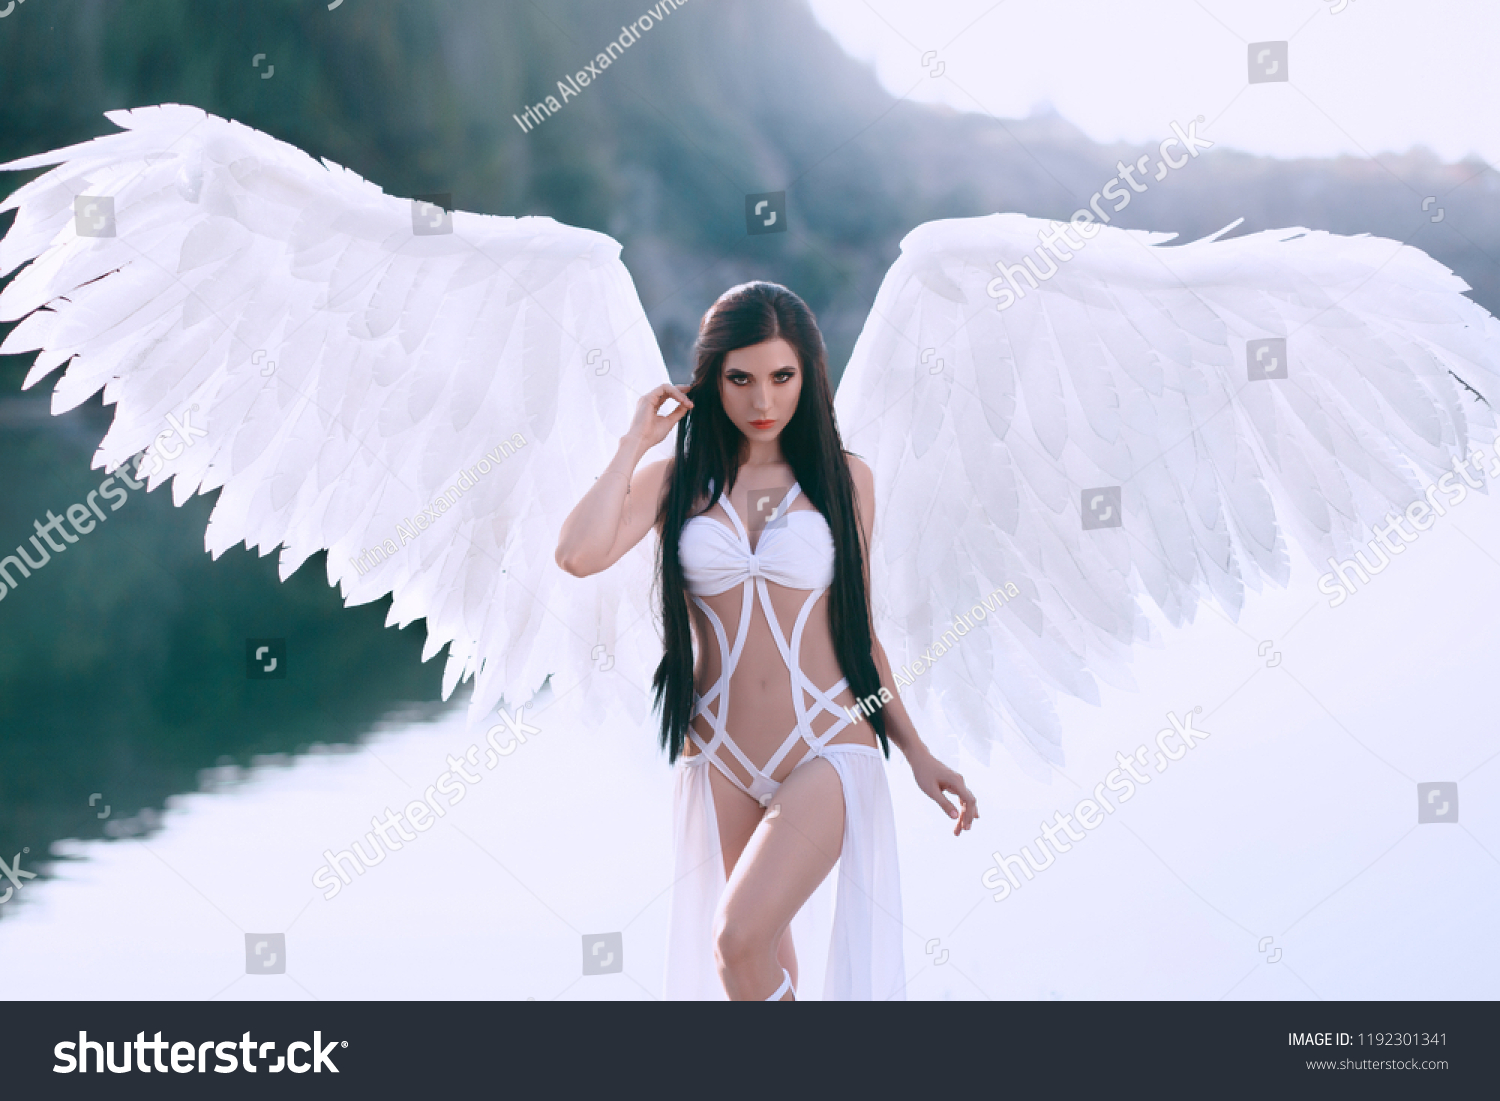 Pics Of Sexy Angels